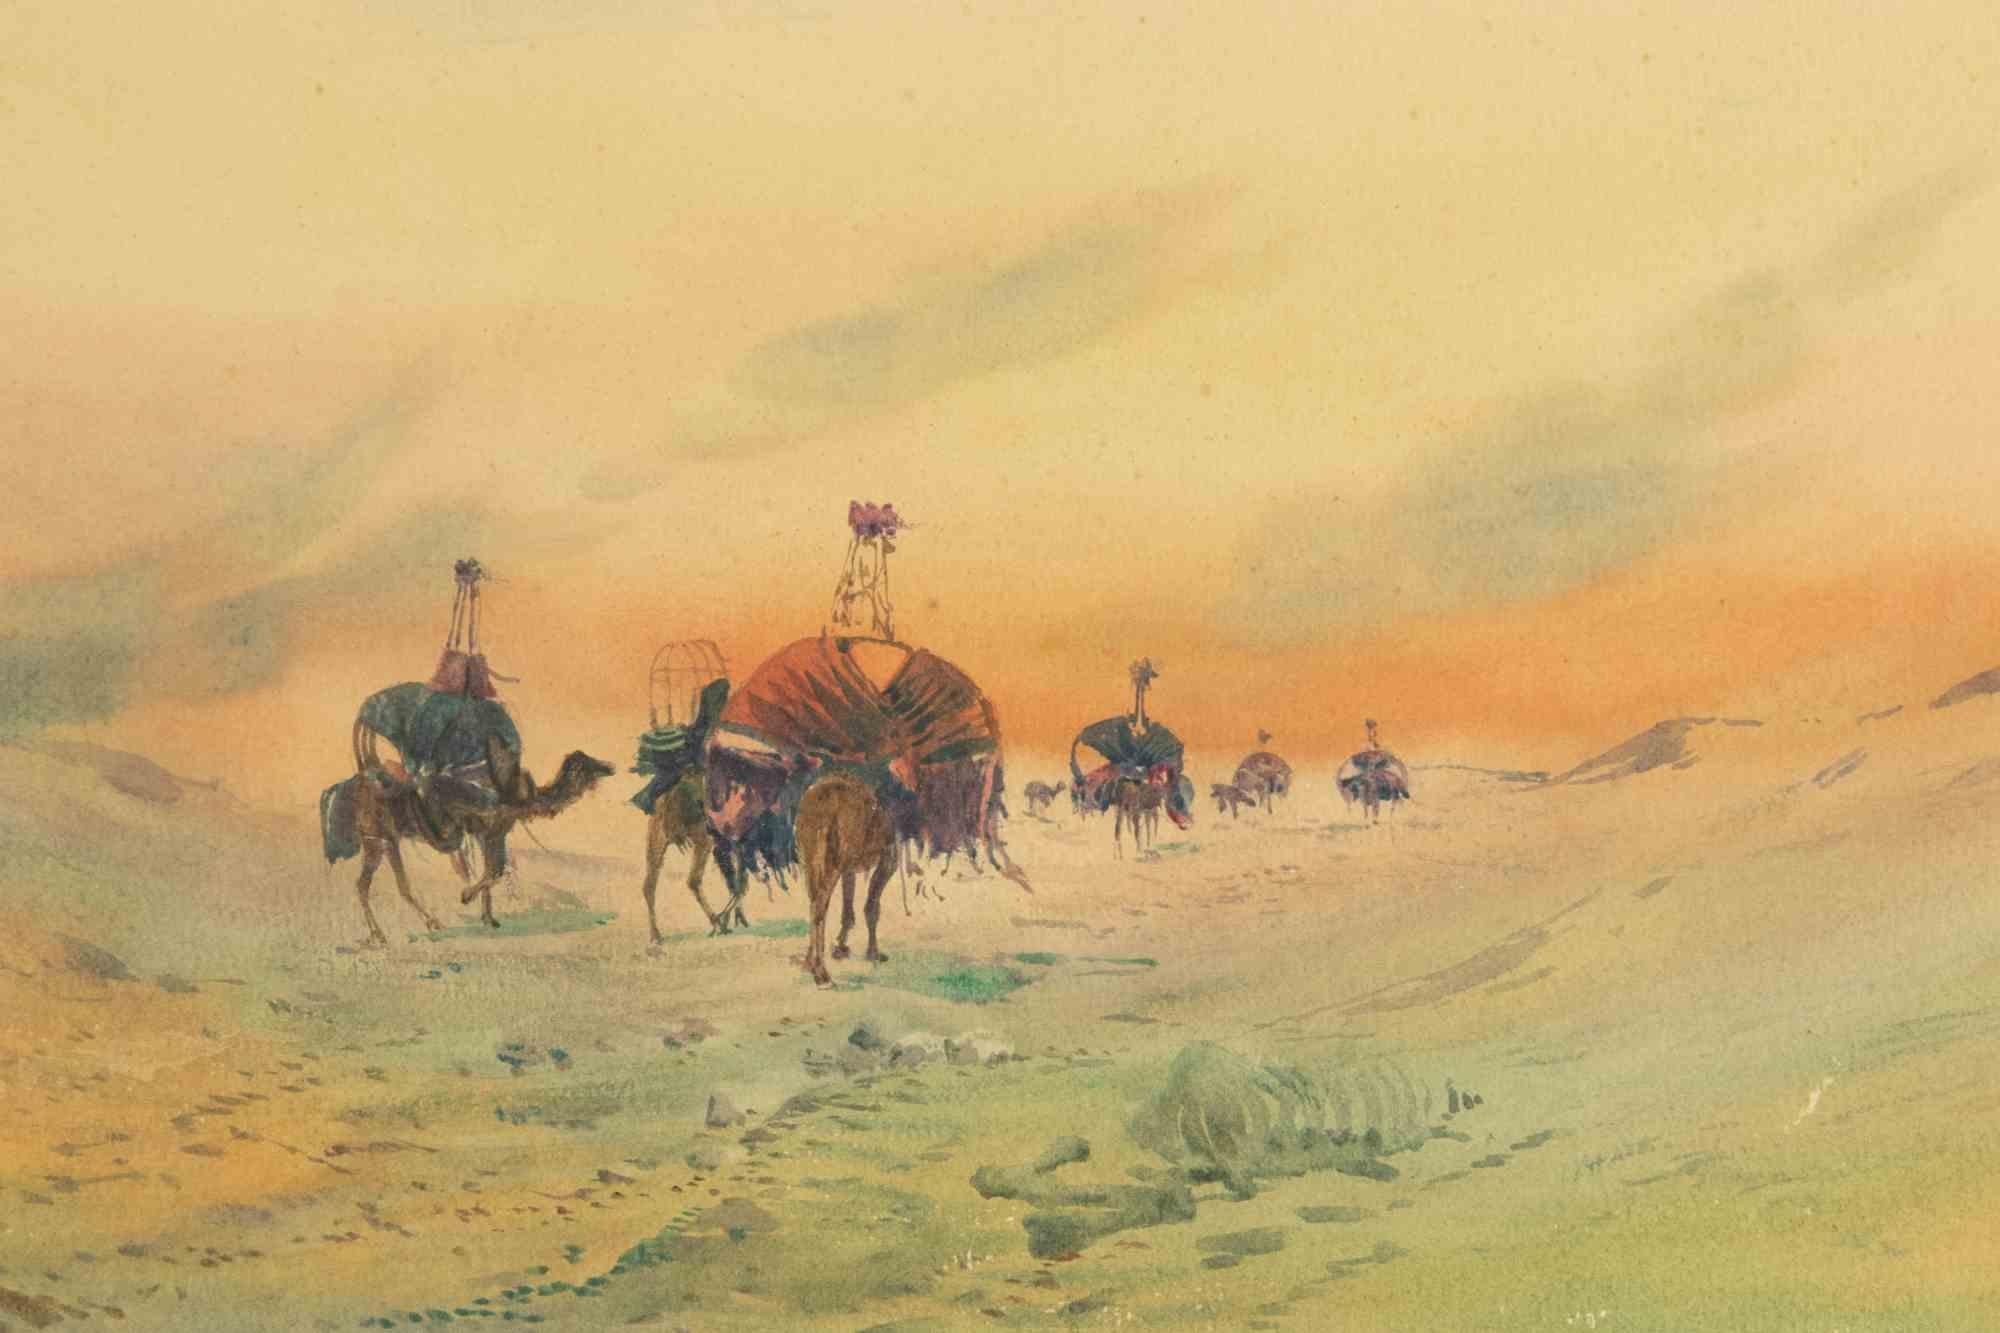 A. Roy Landscape Art - Arabic Desert - Drawing in Ink and Watercolor - Late 20th century